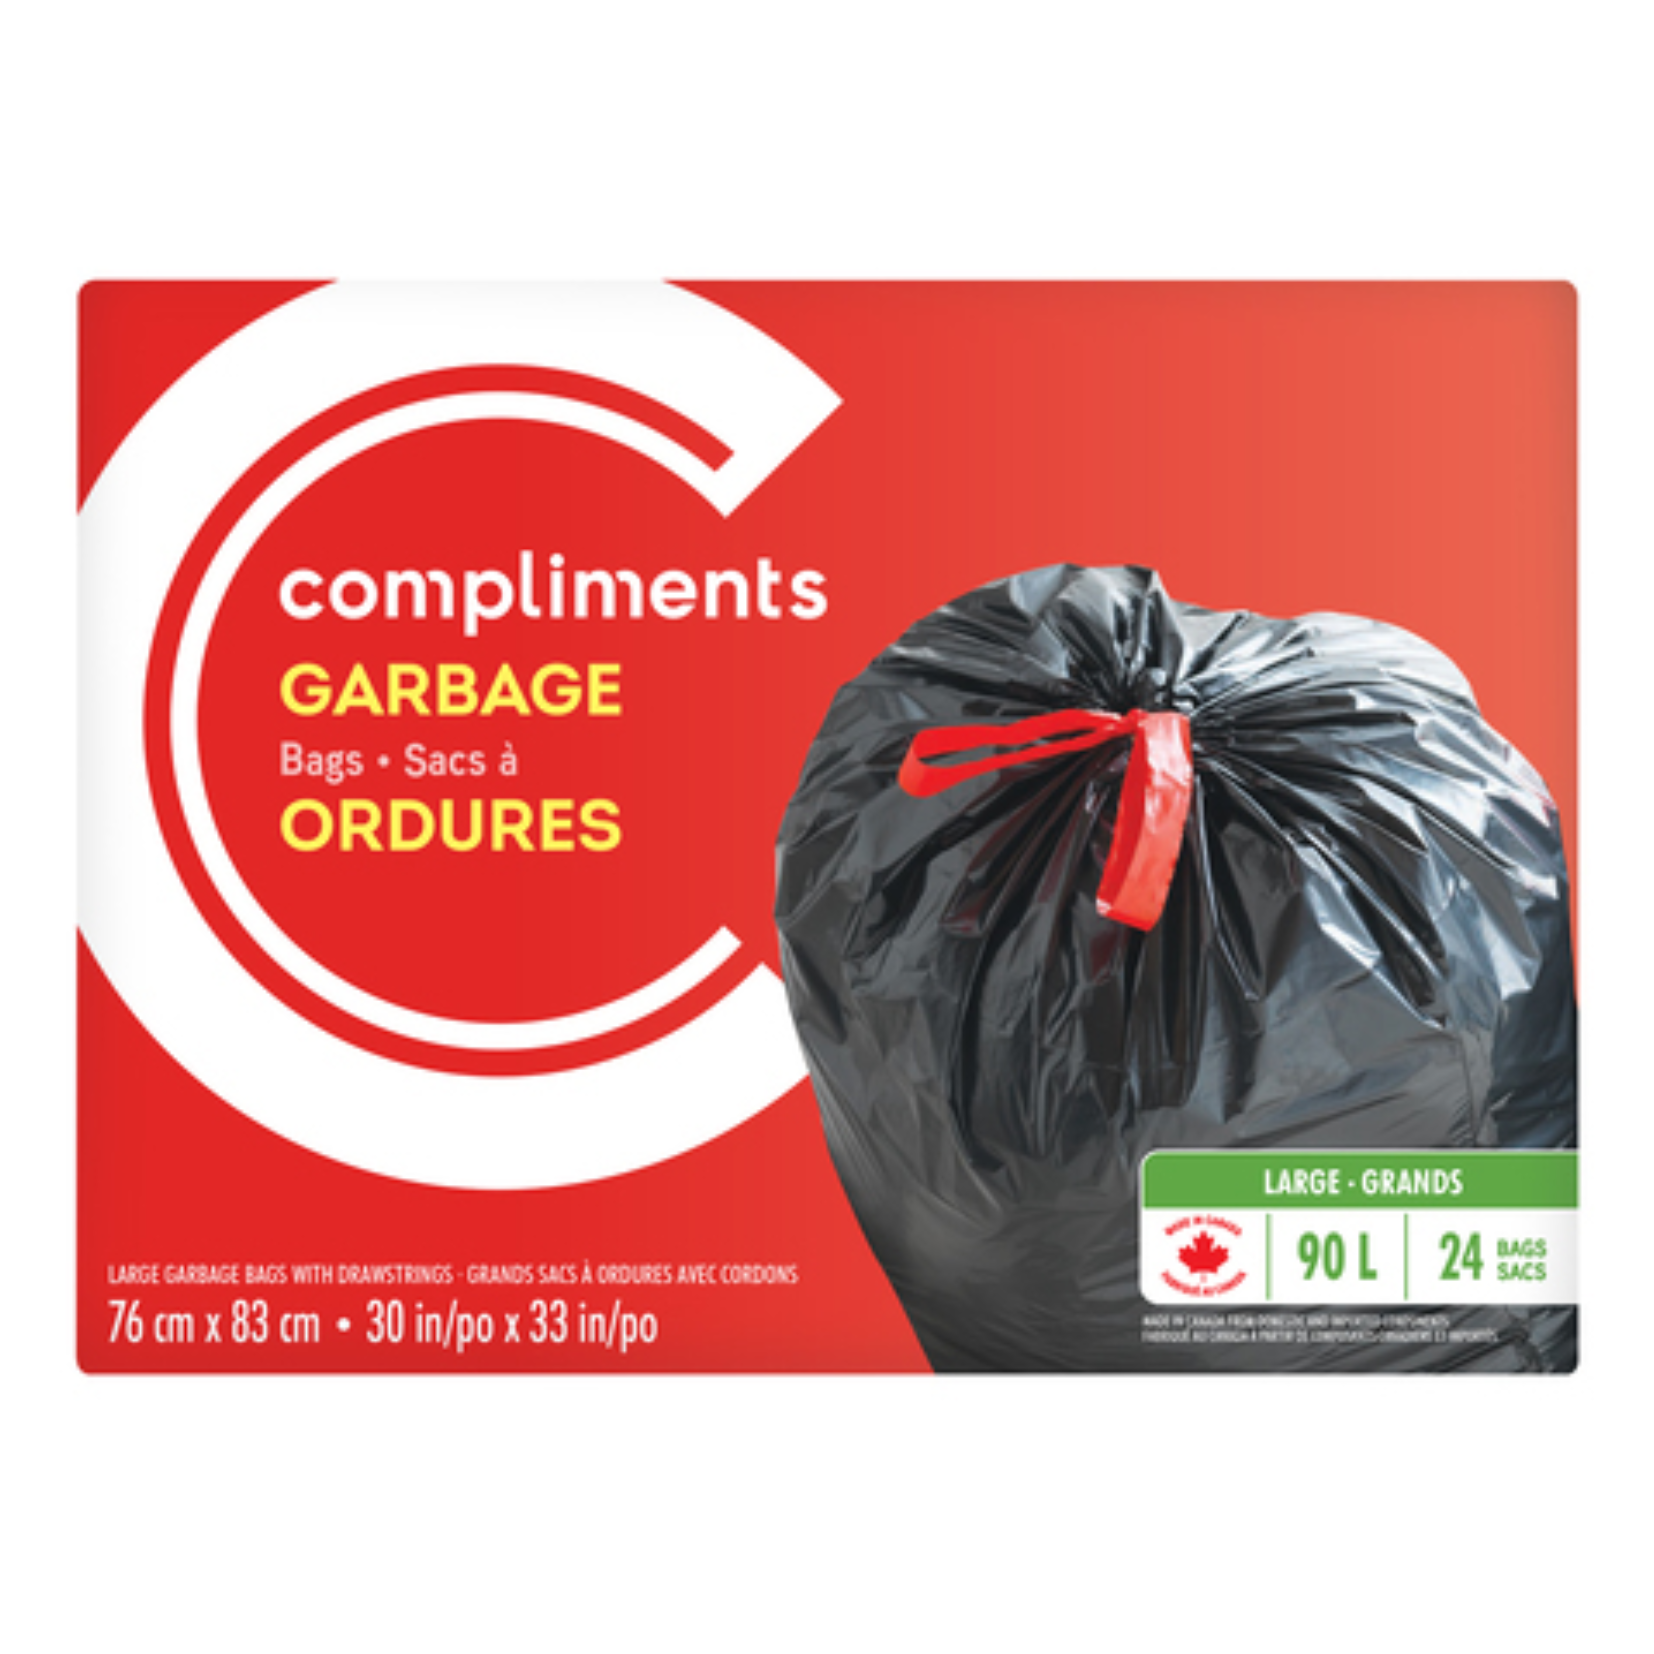 Compliments Garbage Bag With Drawstring 90L x 24